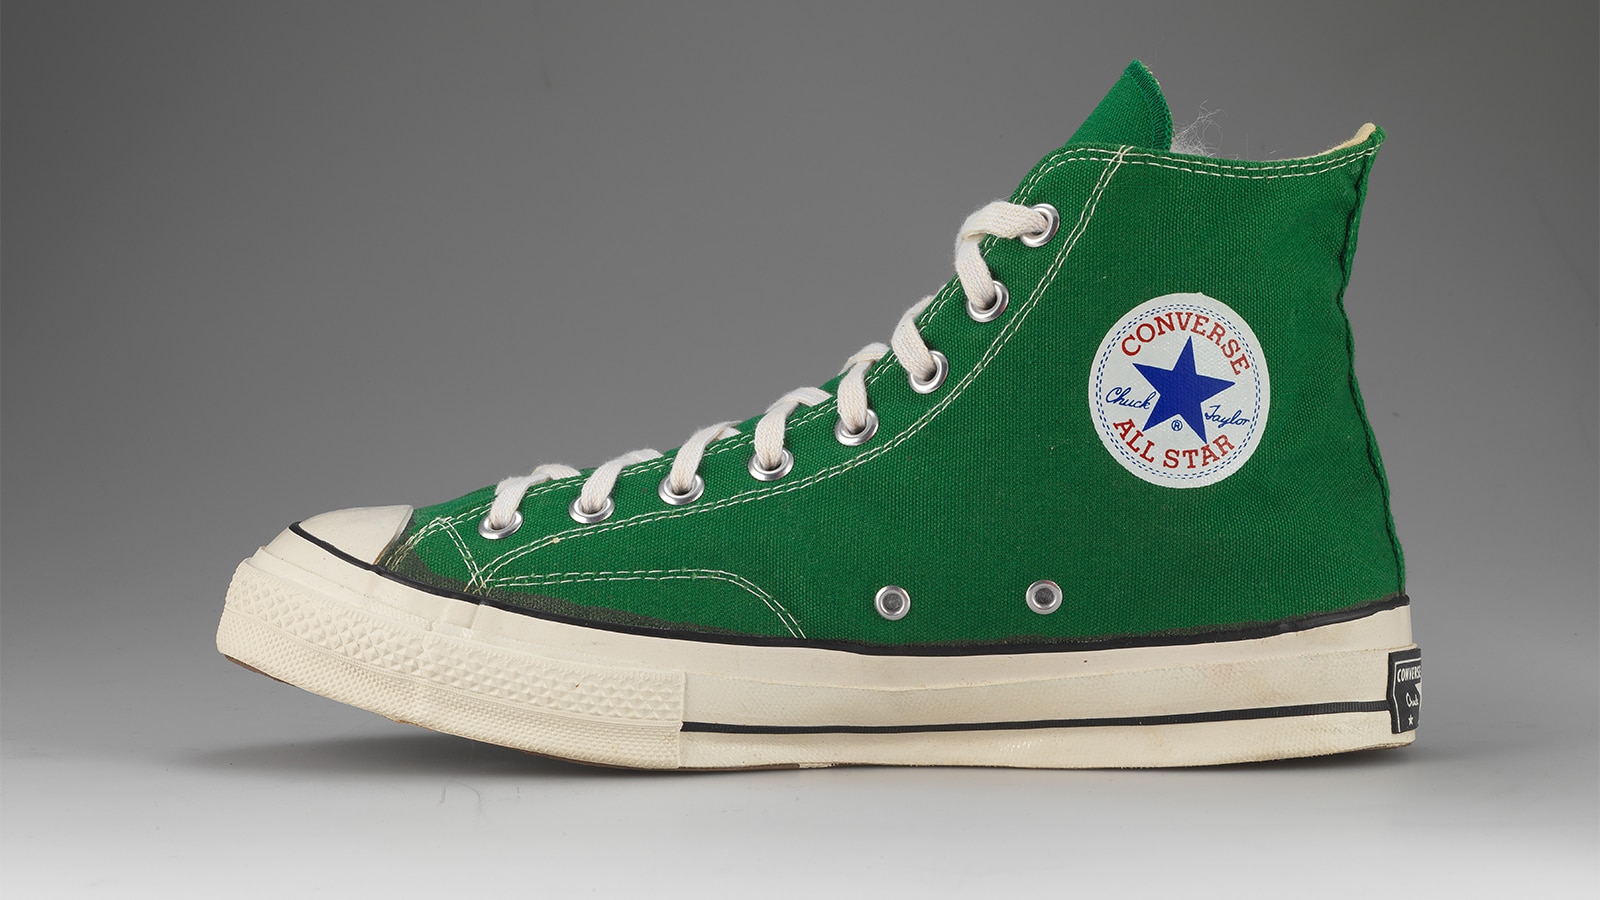 Why Are Converse Called Chucks?